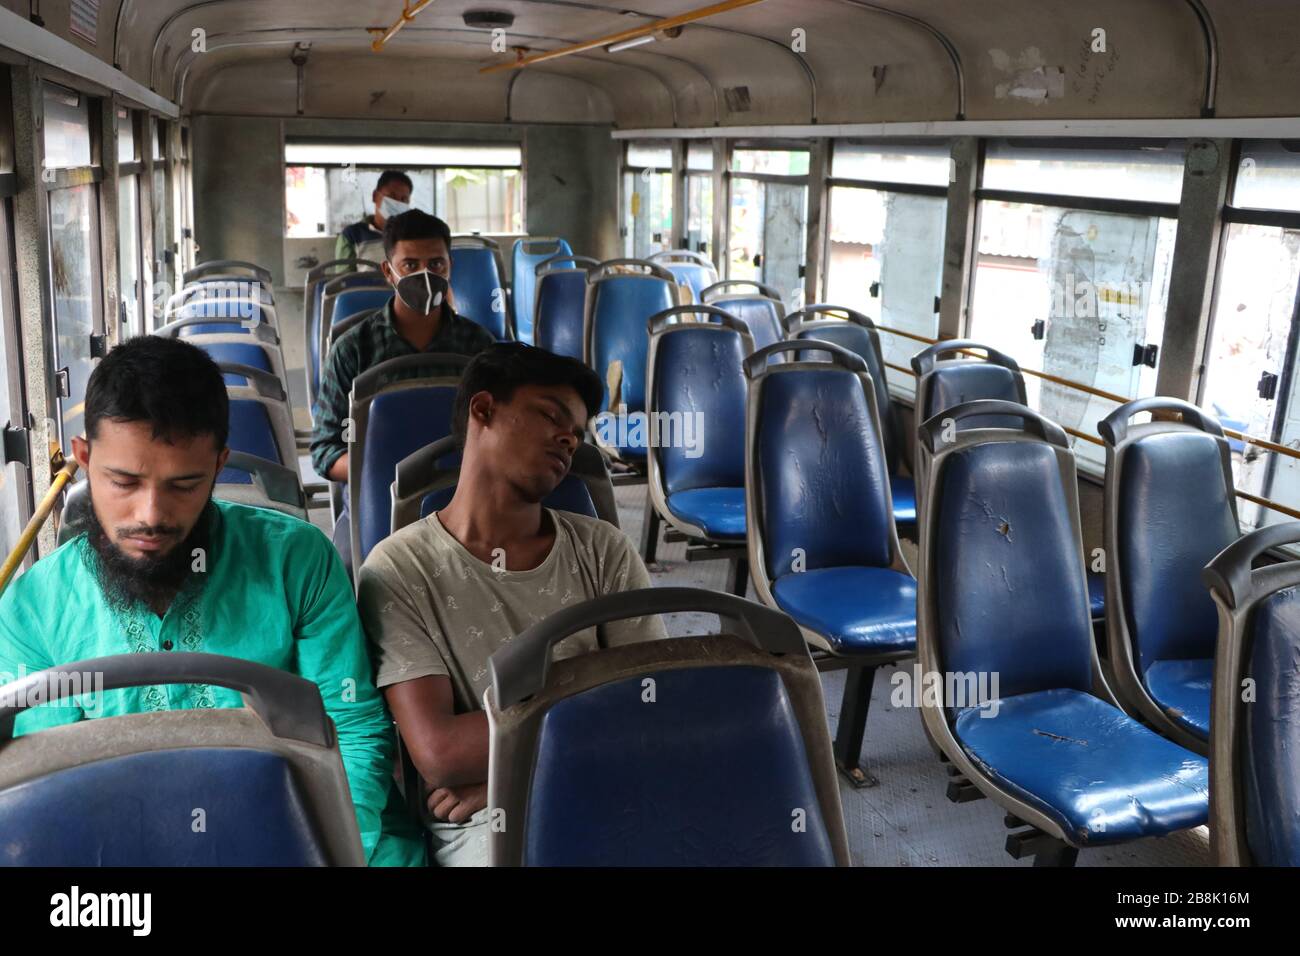 Last day of the weekend, There were very few peoples on the public transport for the coronavirus.© Nazmul Islam / Alamy Stock Photo Stock Photo